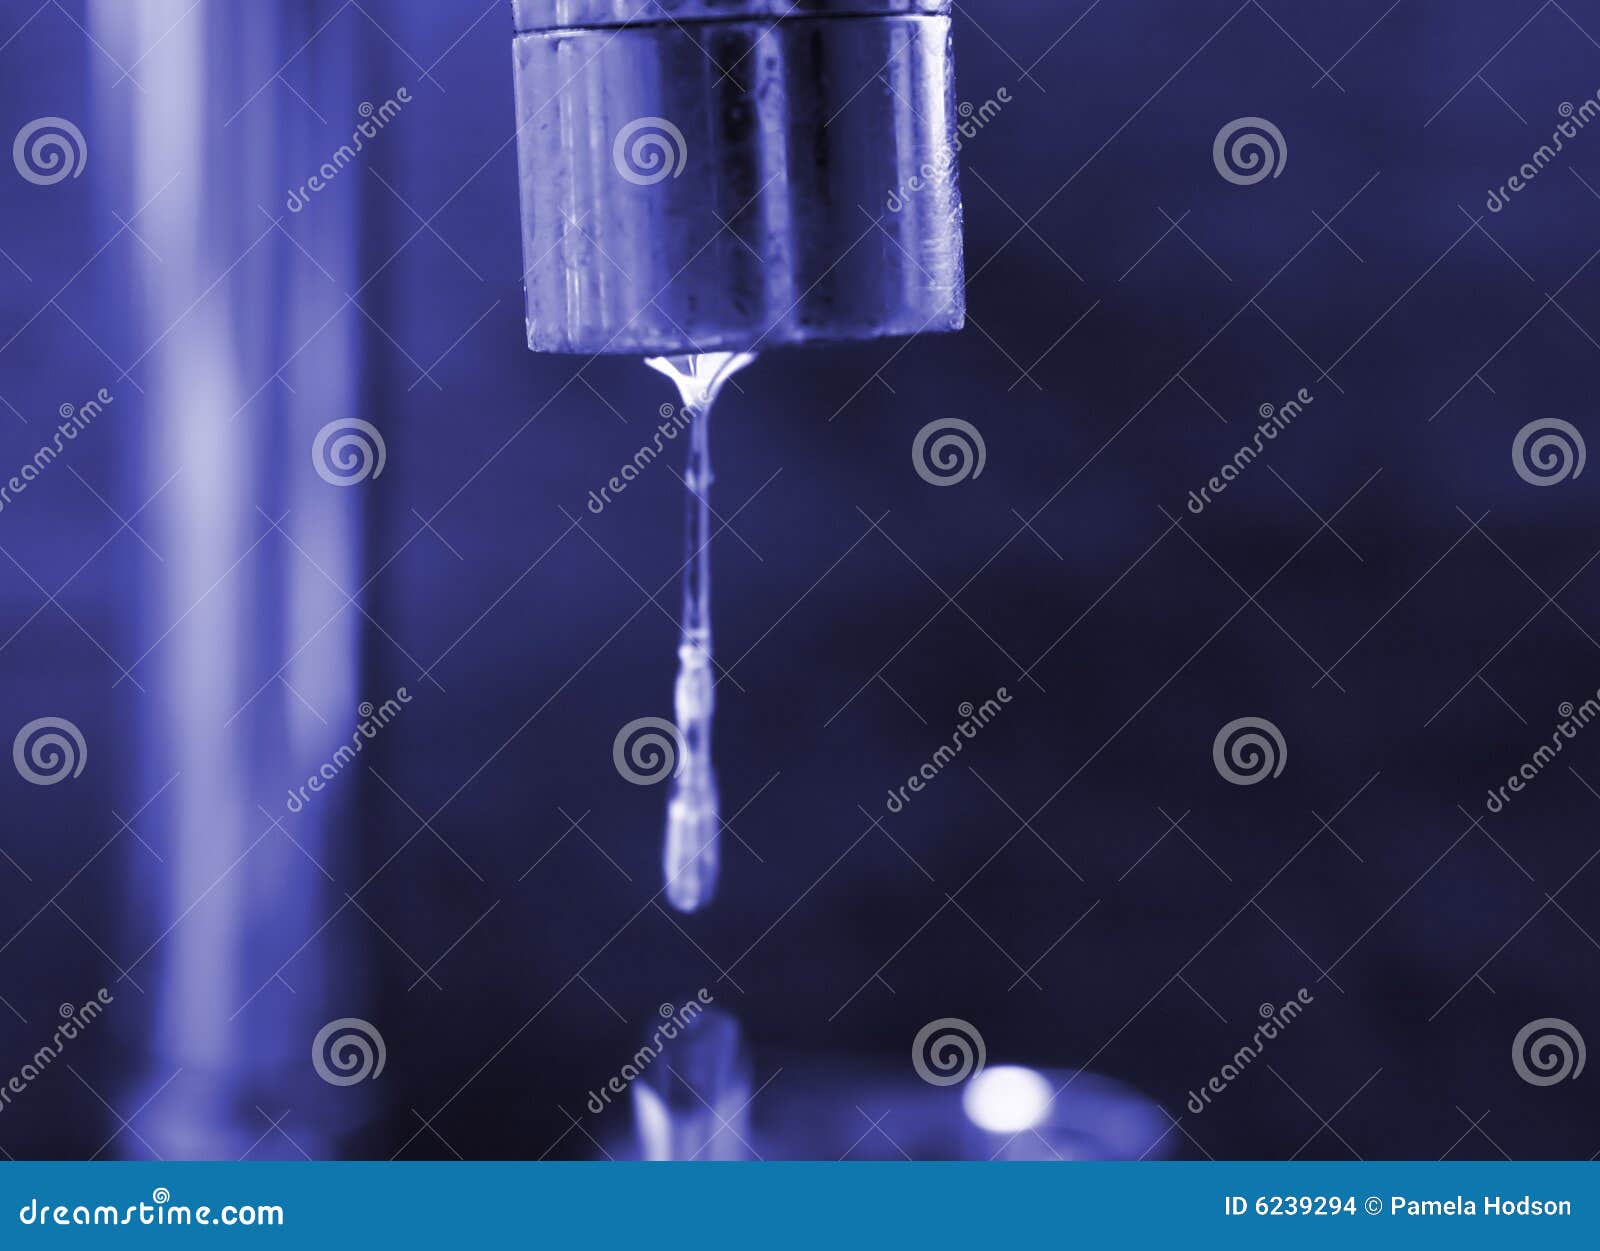 water flowing from the tap